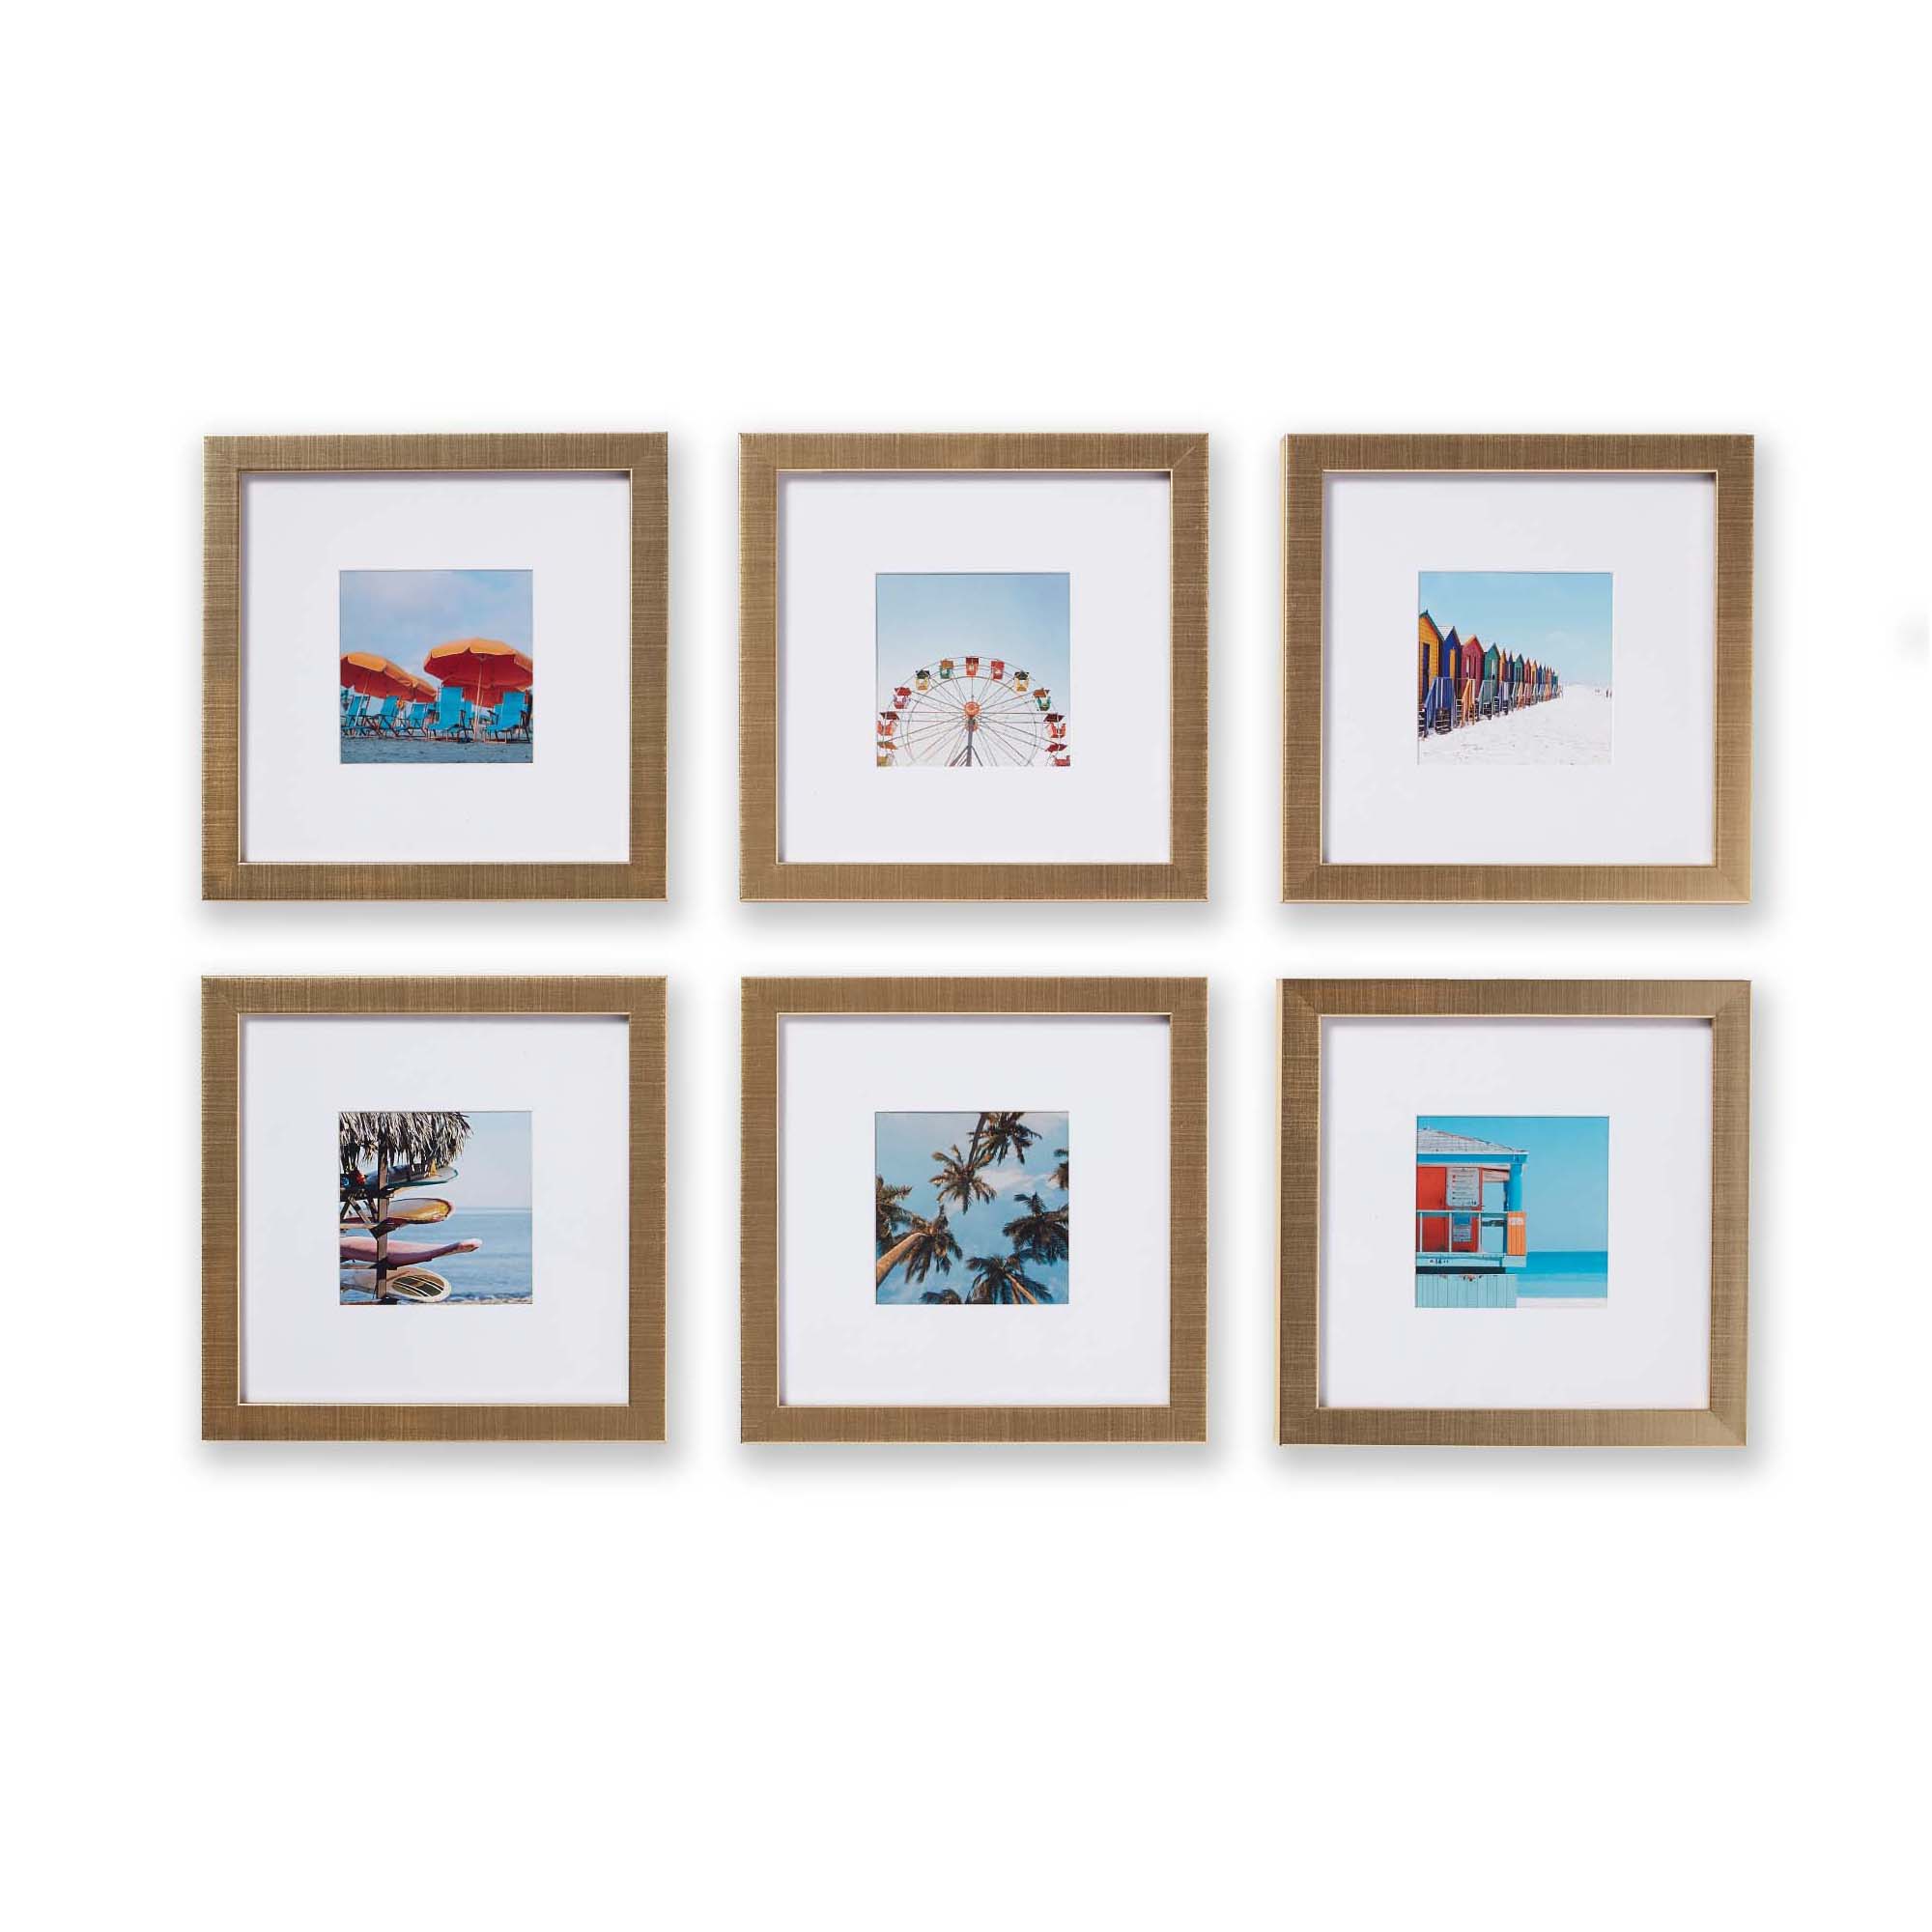 Old Town 6pk- 8x8 Matted Square Gallery Picture Frames (Gold, 8x8